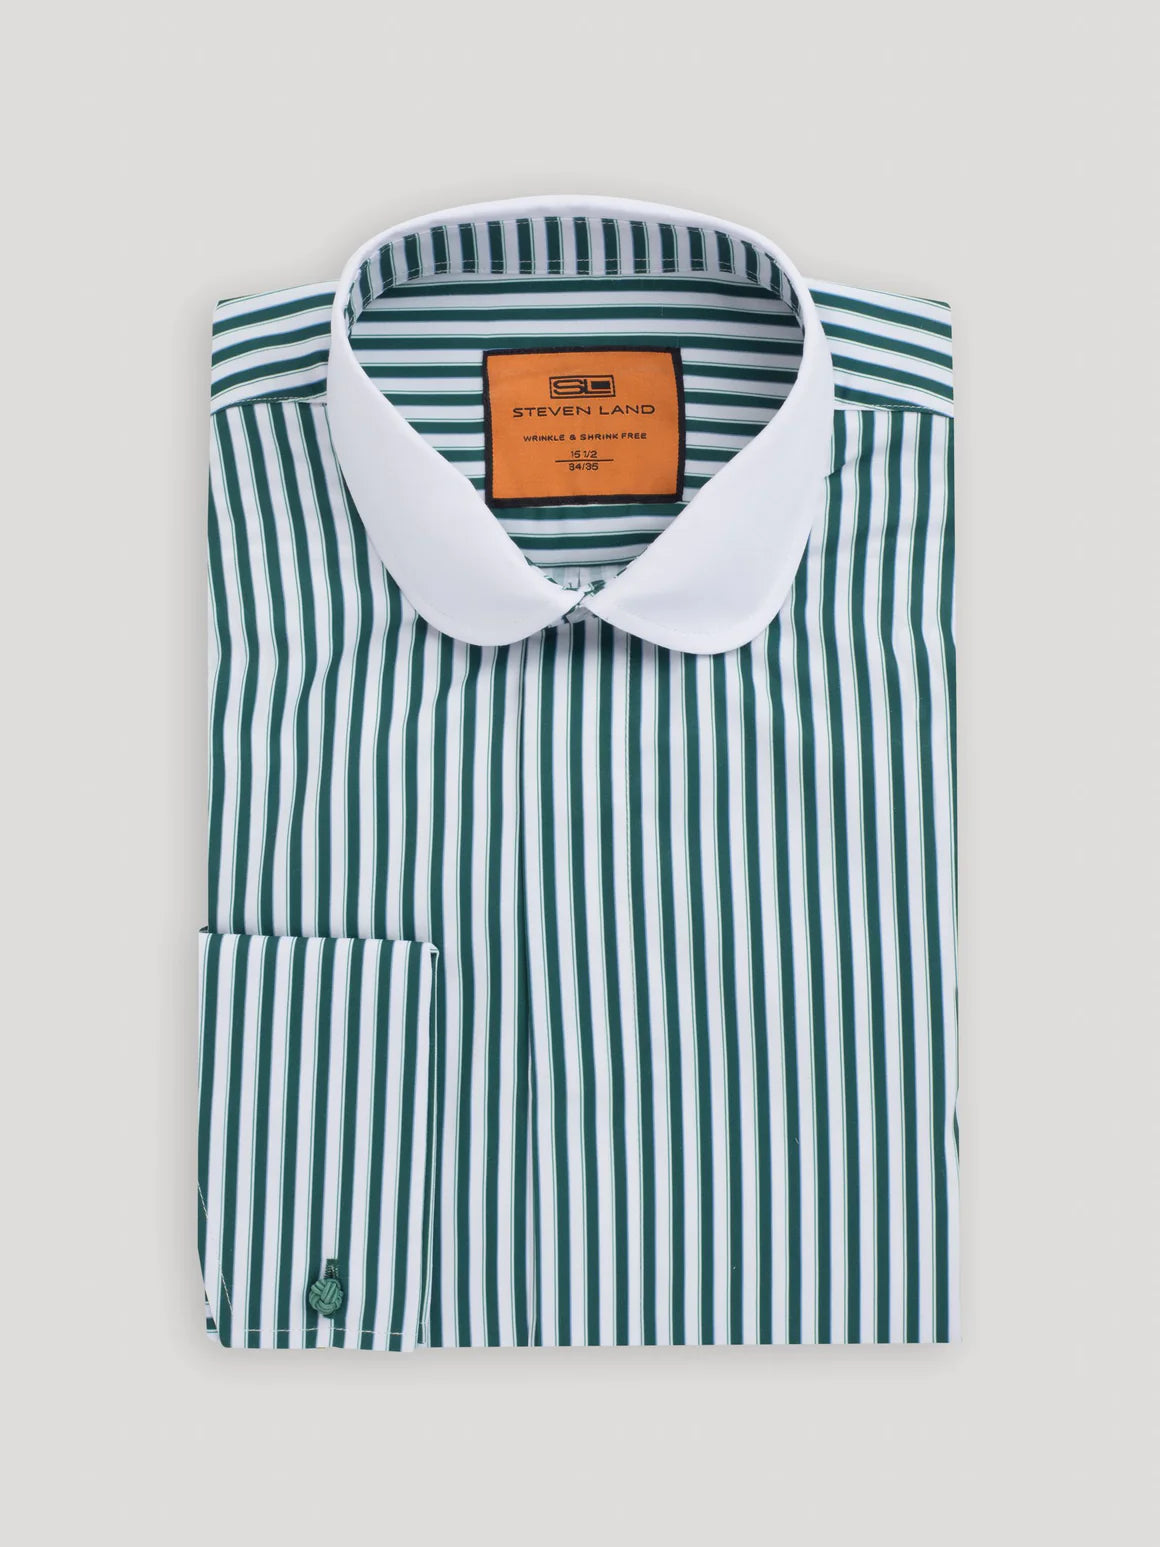 Steven Land Green Striped Contrast Collar French Cuff Wrinkle Free Dress Shirt